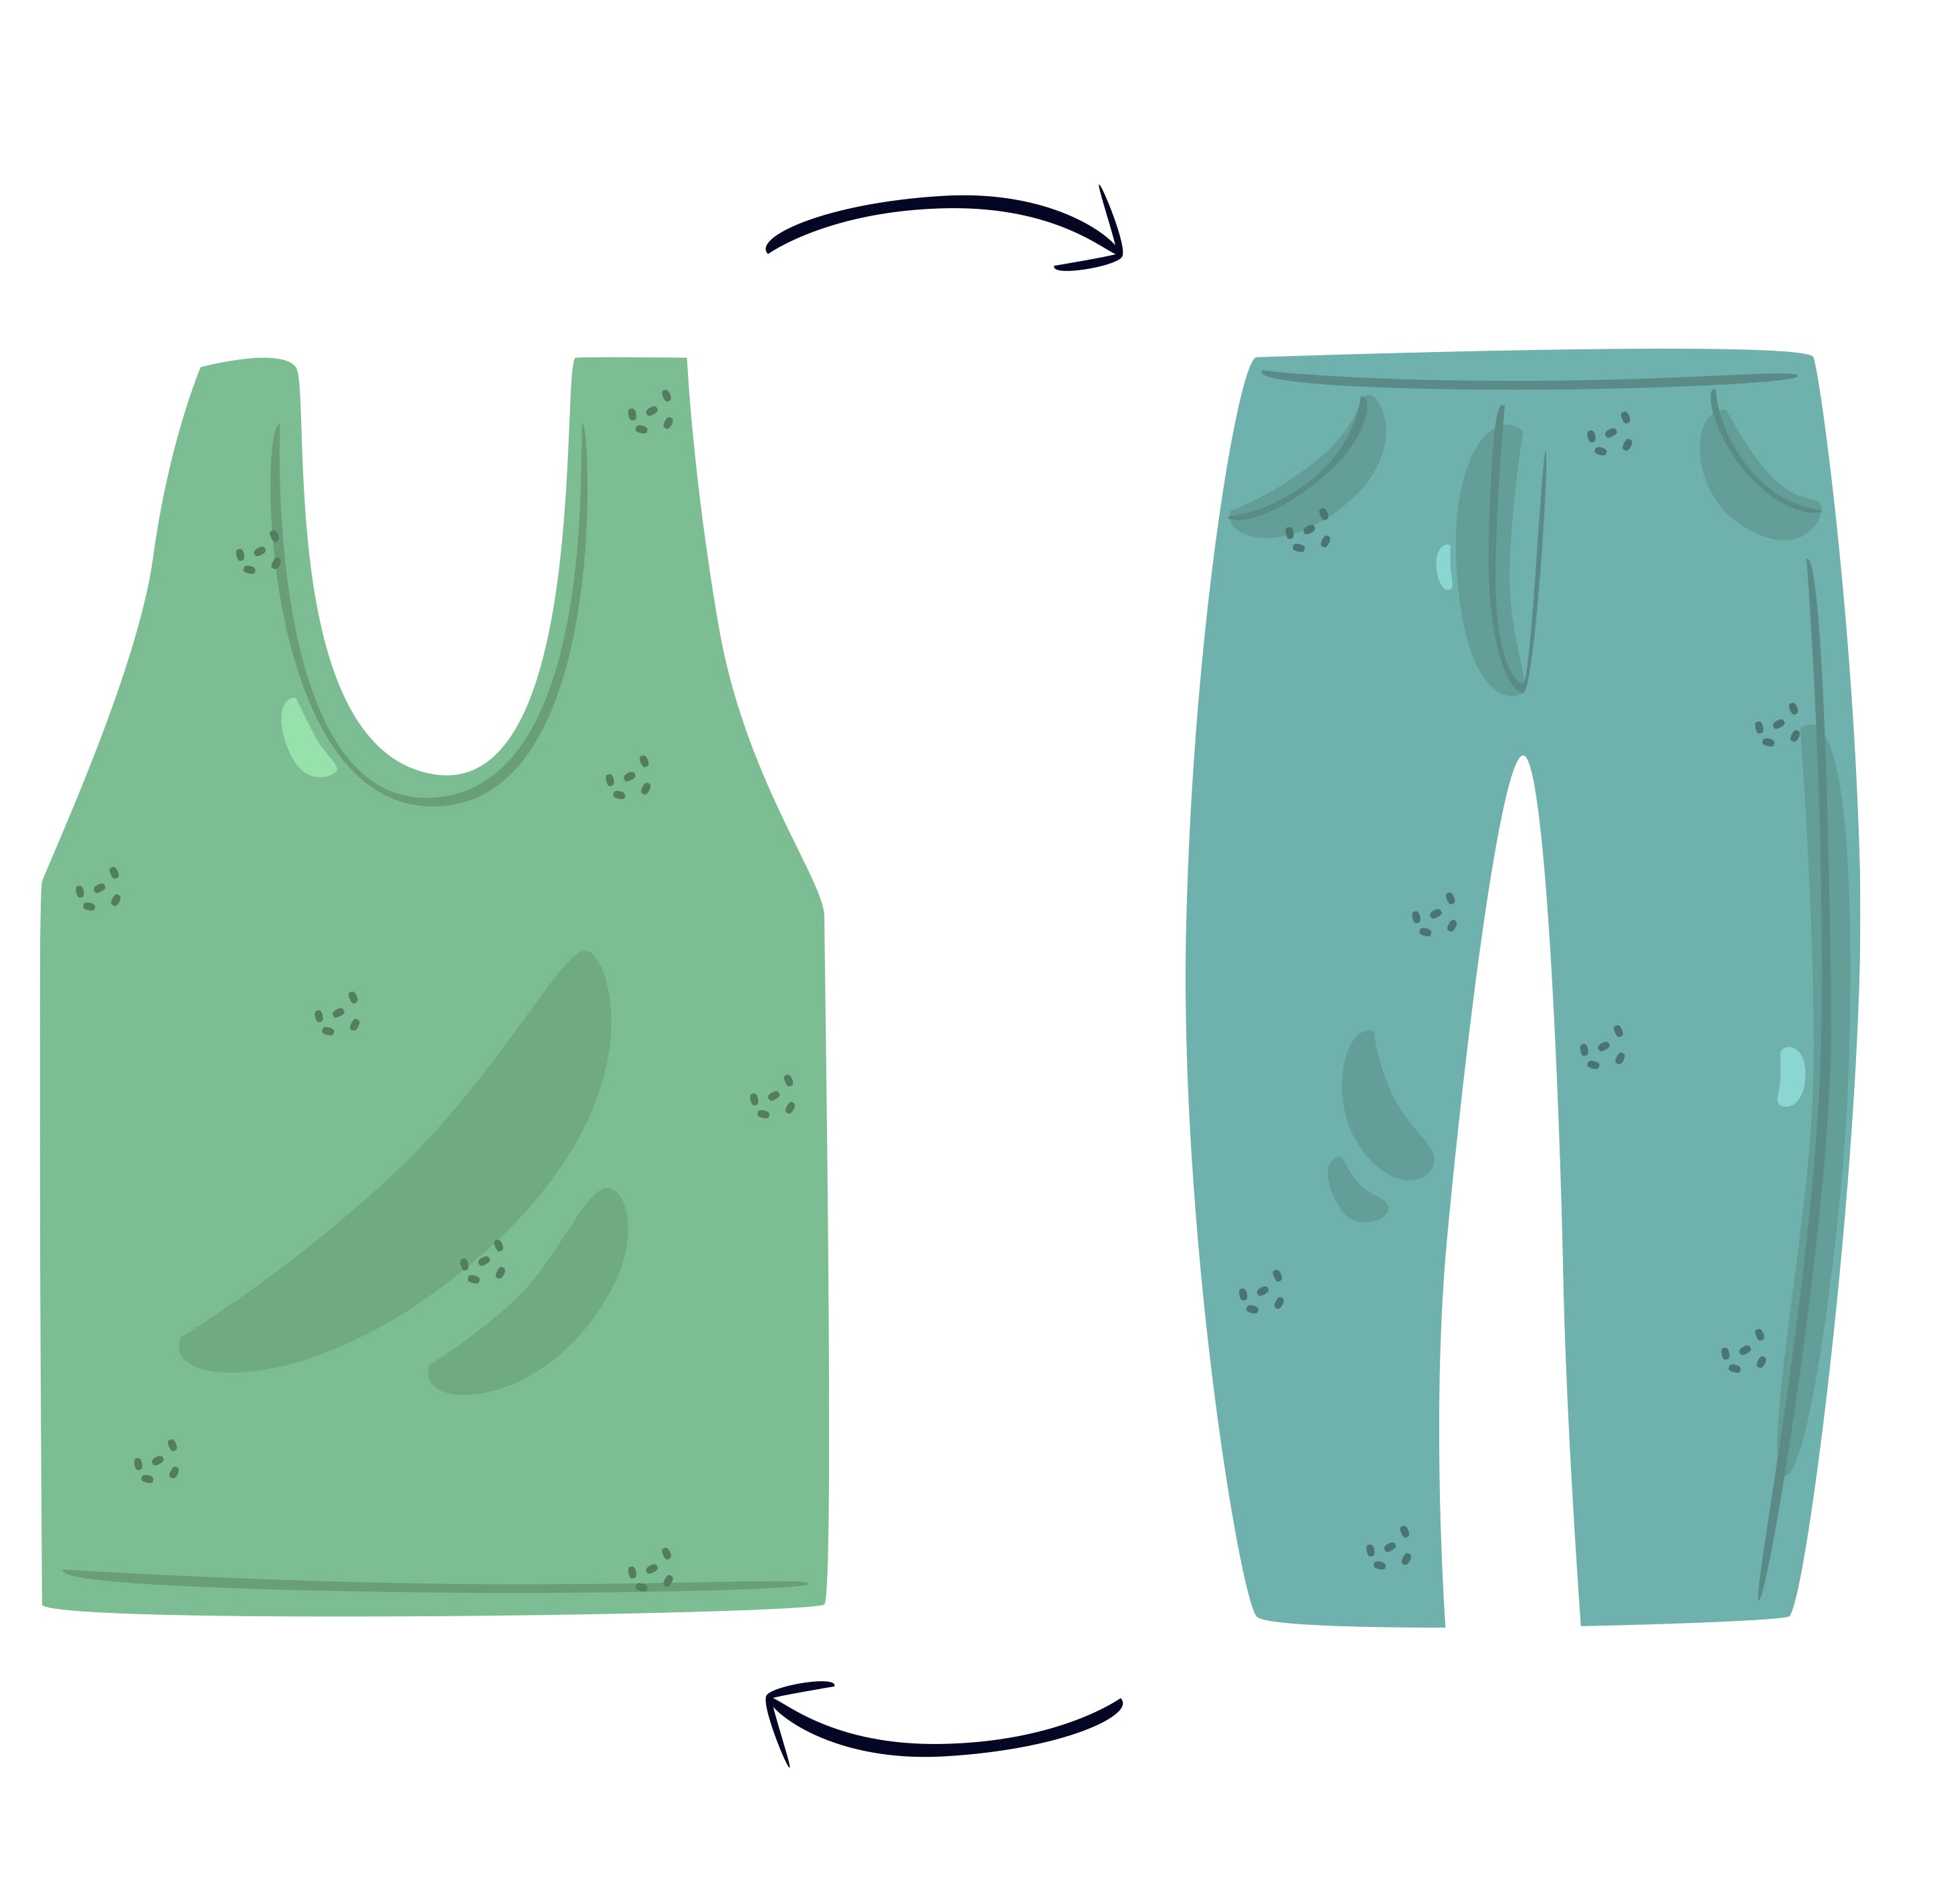 Recycle unwanted clothing - How To Live Sustainable - Eco Living and Sustainability Checklist